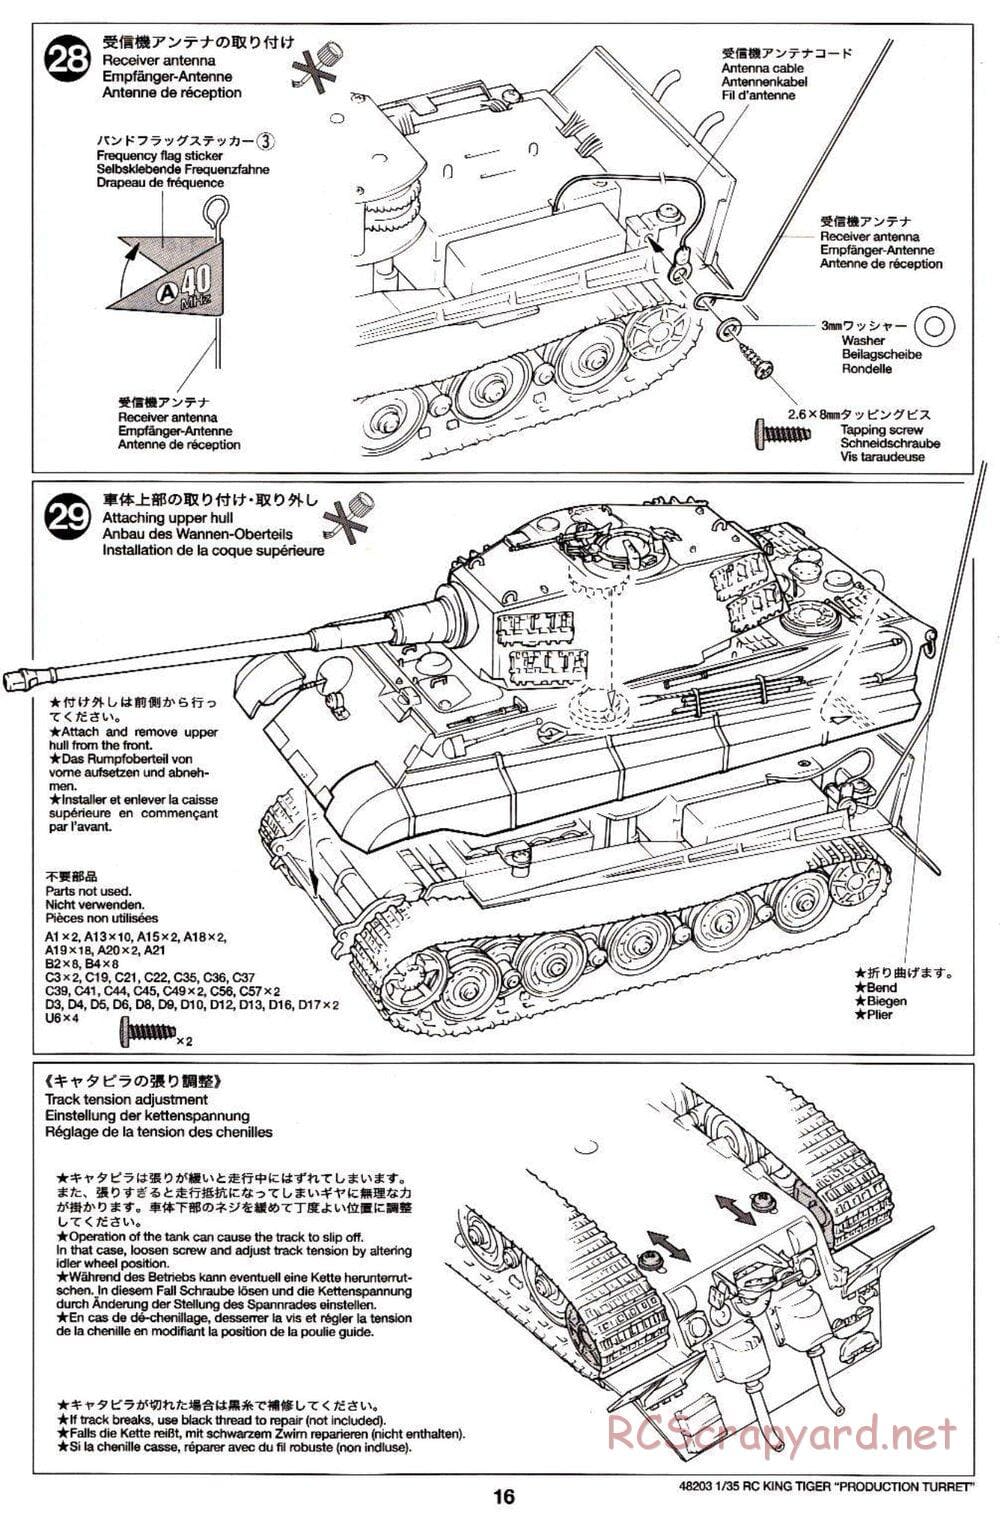 Tamiya - German King Tiger (Production Turret) - 1/35 Scale Chassis - Manual - Page 16